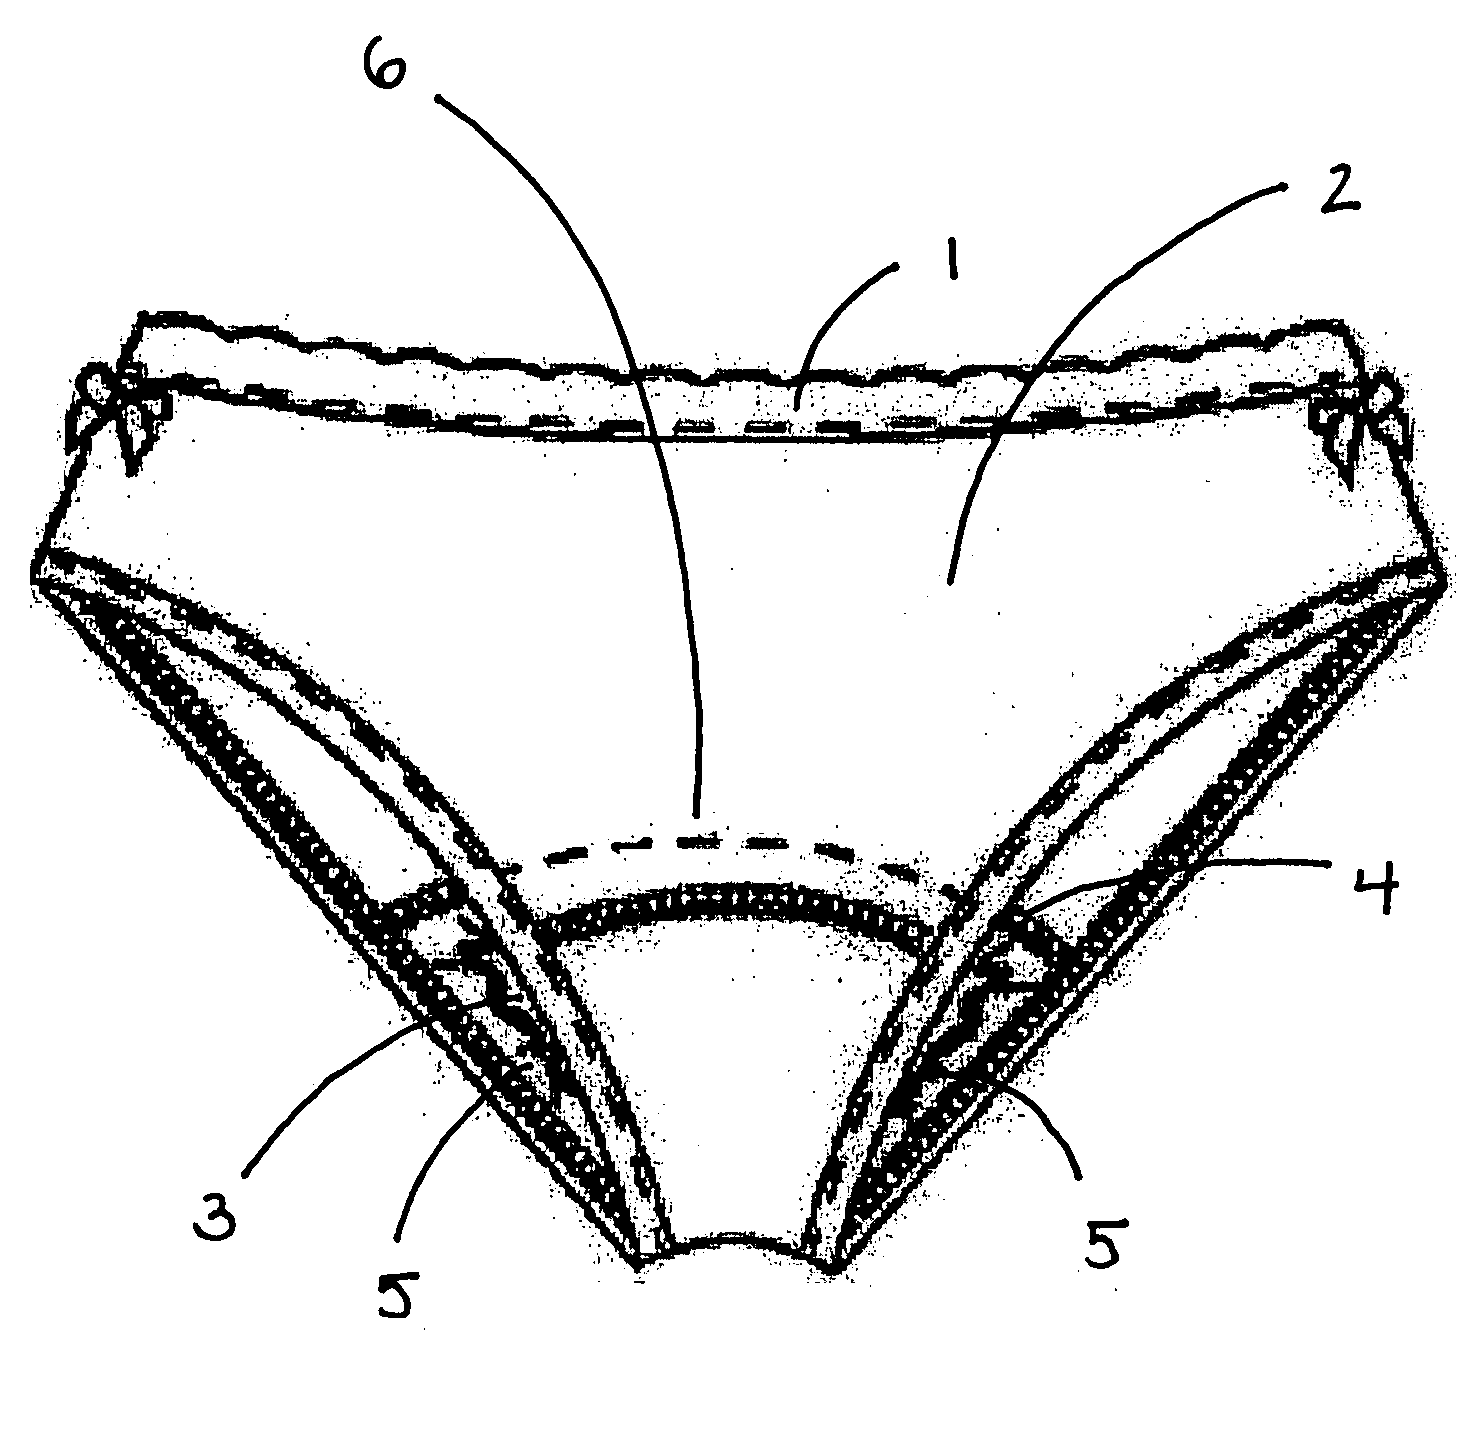 Undergarment for prevention of leaks and permanent stains